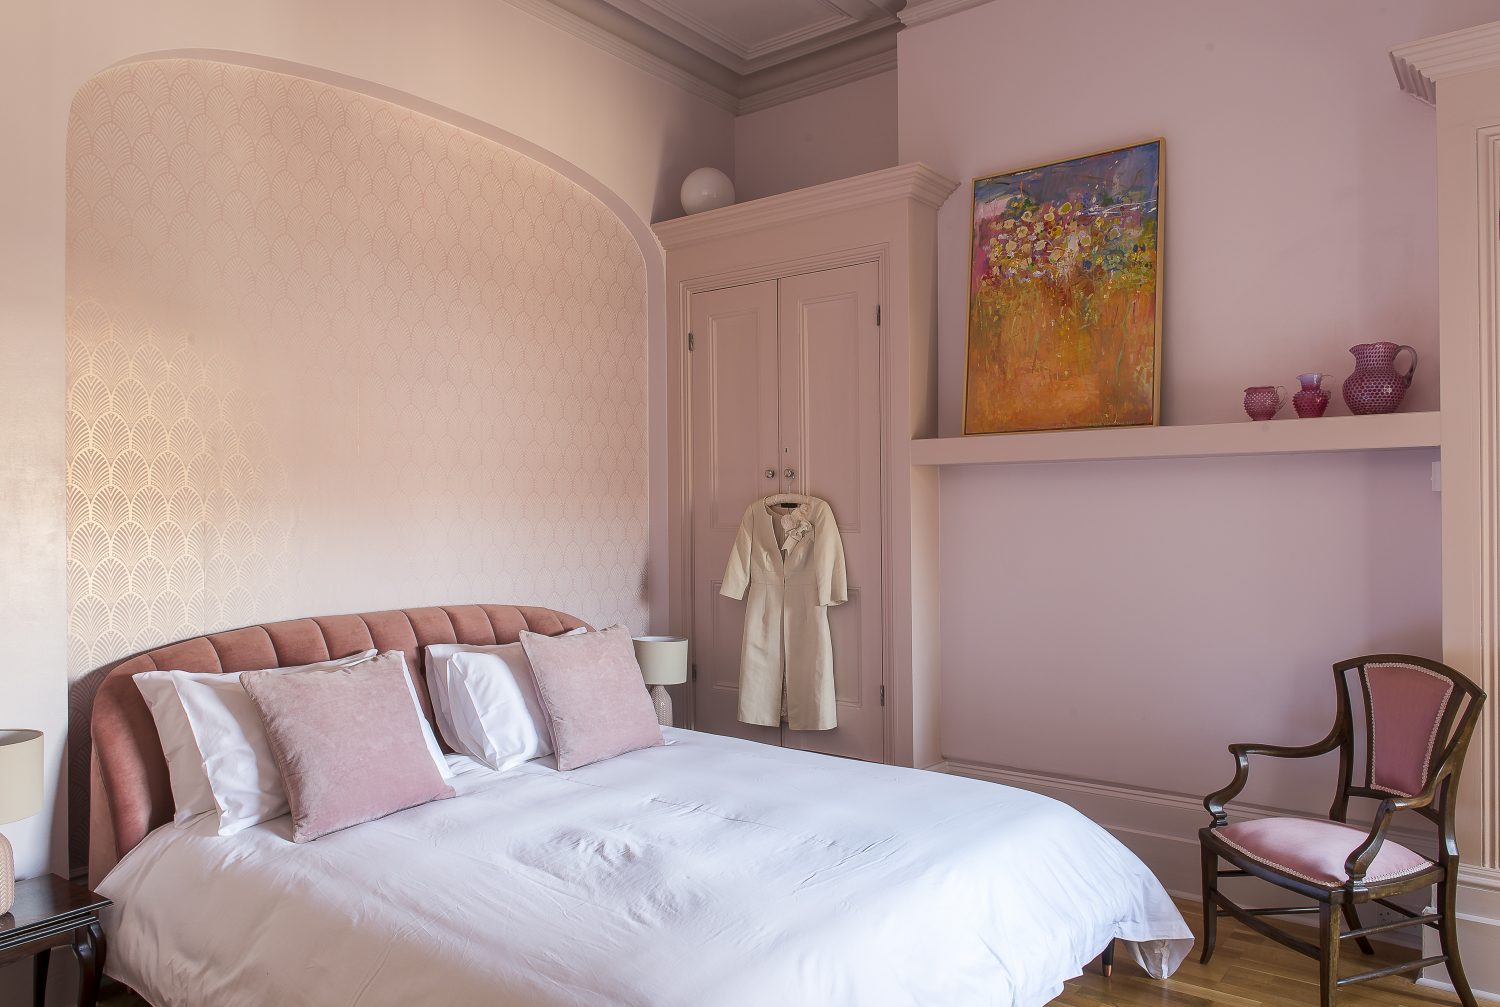 A guest bedroom features a padded and buttoned pink velvet headboard against a wall of deco wallpaper, which gives it a bit of a Biba air